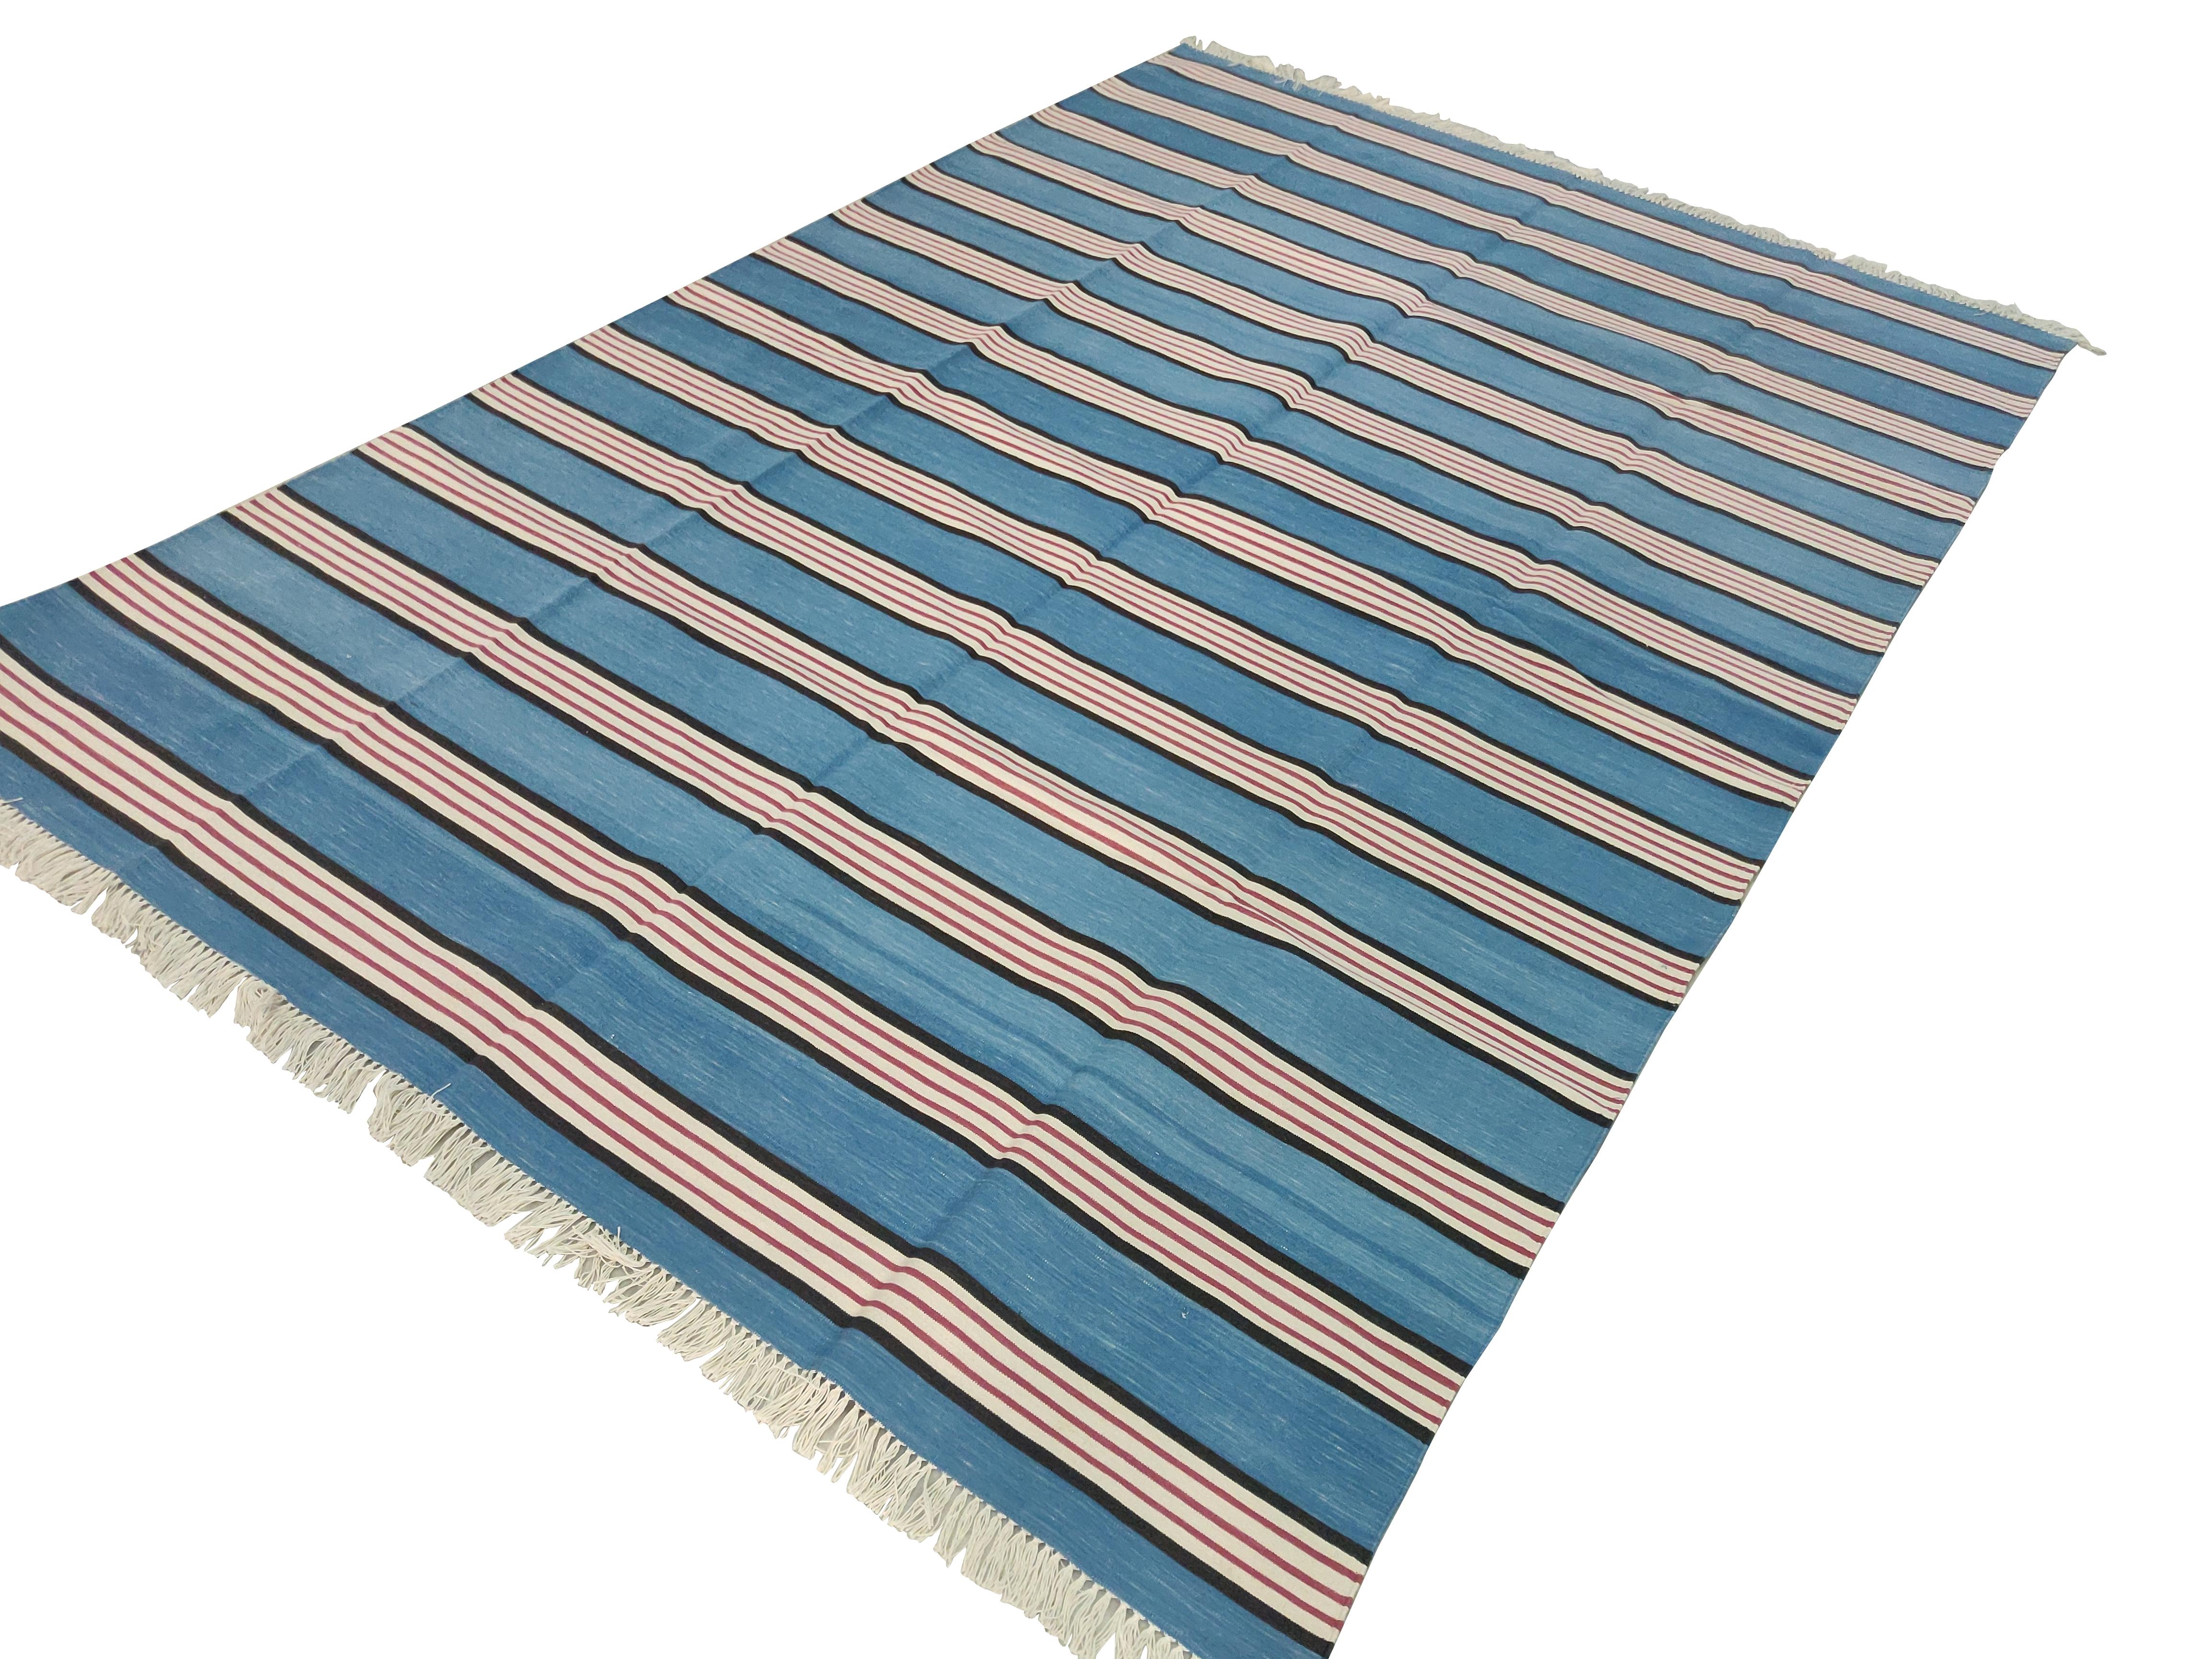 Cotton Vegetable Dyed Blue, Coffee Brown And Pink Striped Indian Dhurrie Rug-6'x9' 
These special flat-weave dhurries are hand-woven with 15 ply 100% cotton yarn. Due to the special manufacturing techniques used to create our rugs, the size and